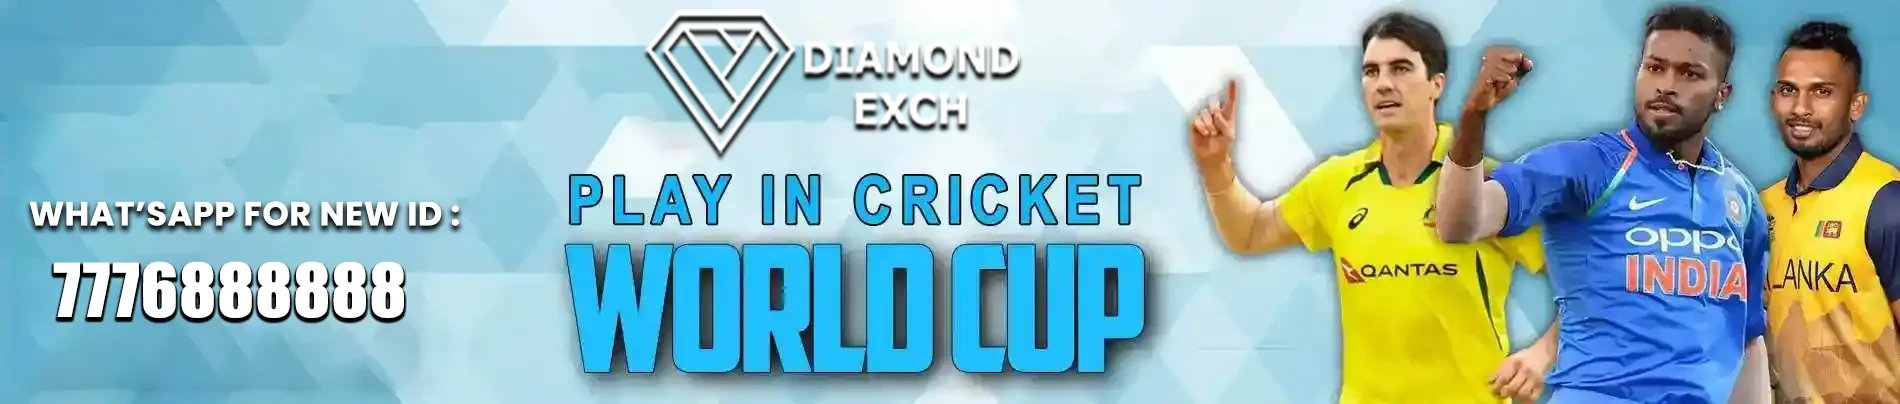 Cricket worldcup players image